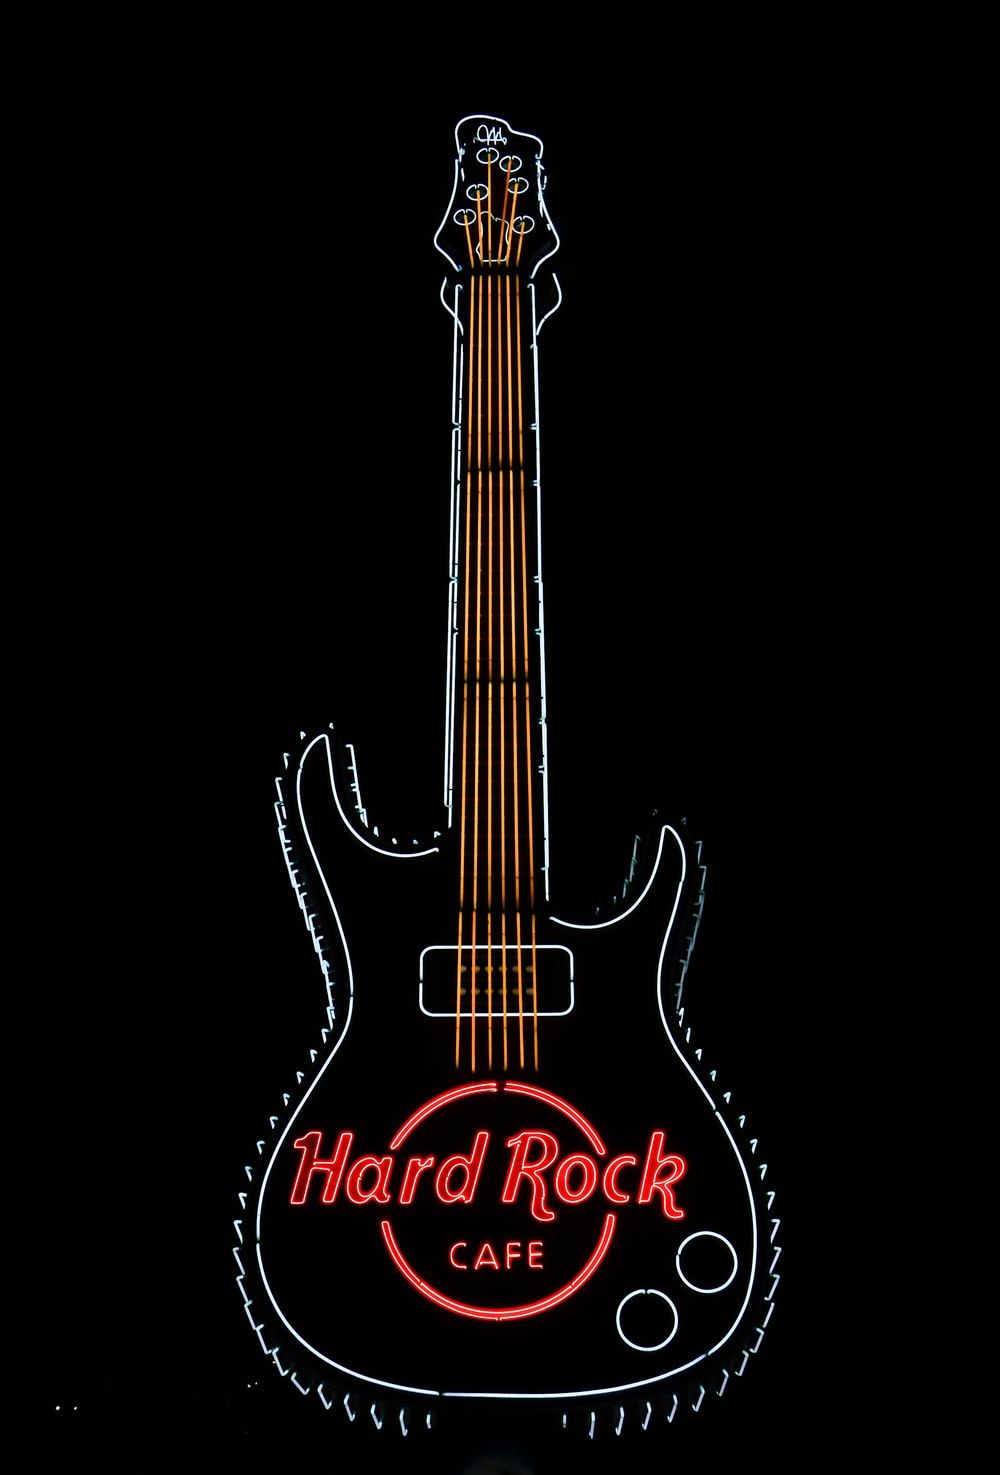 Hard Rock Picture. Download Free Image